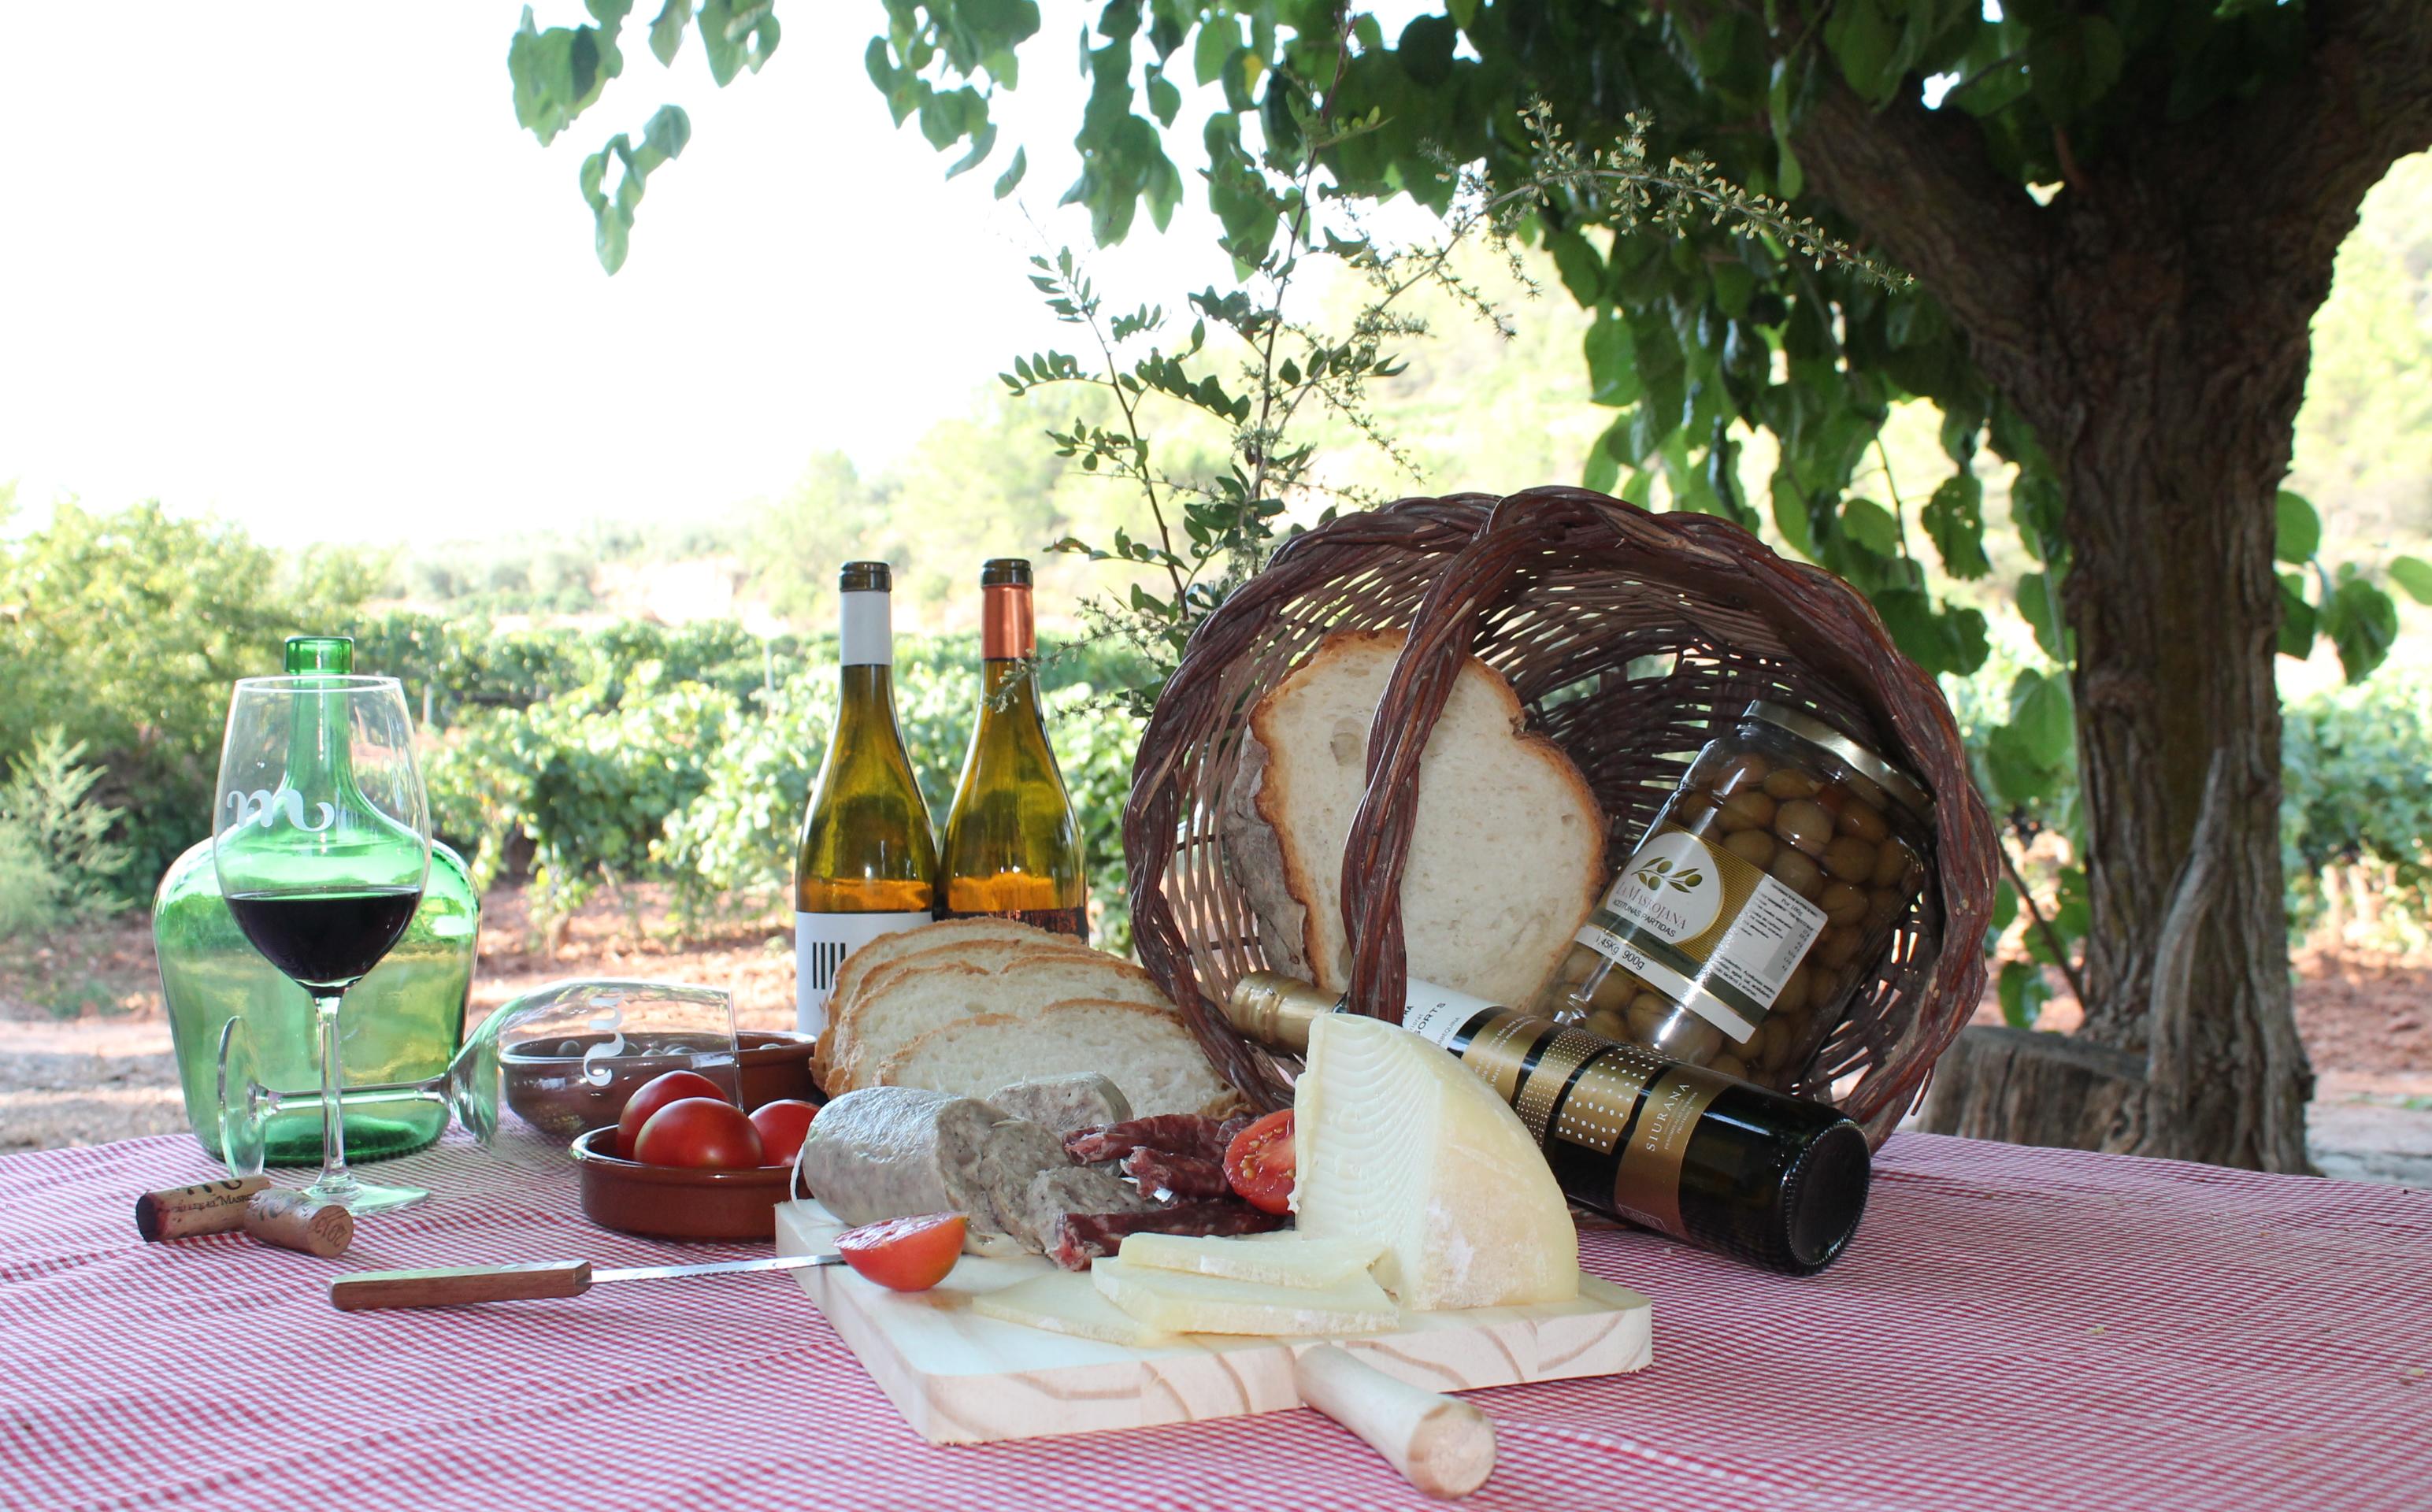 Brunch in a Vineyard - 45 minutes from Tarragona and 2 Hours from Barcelona